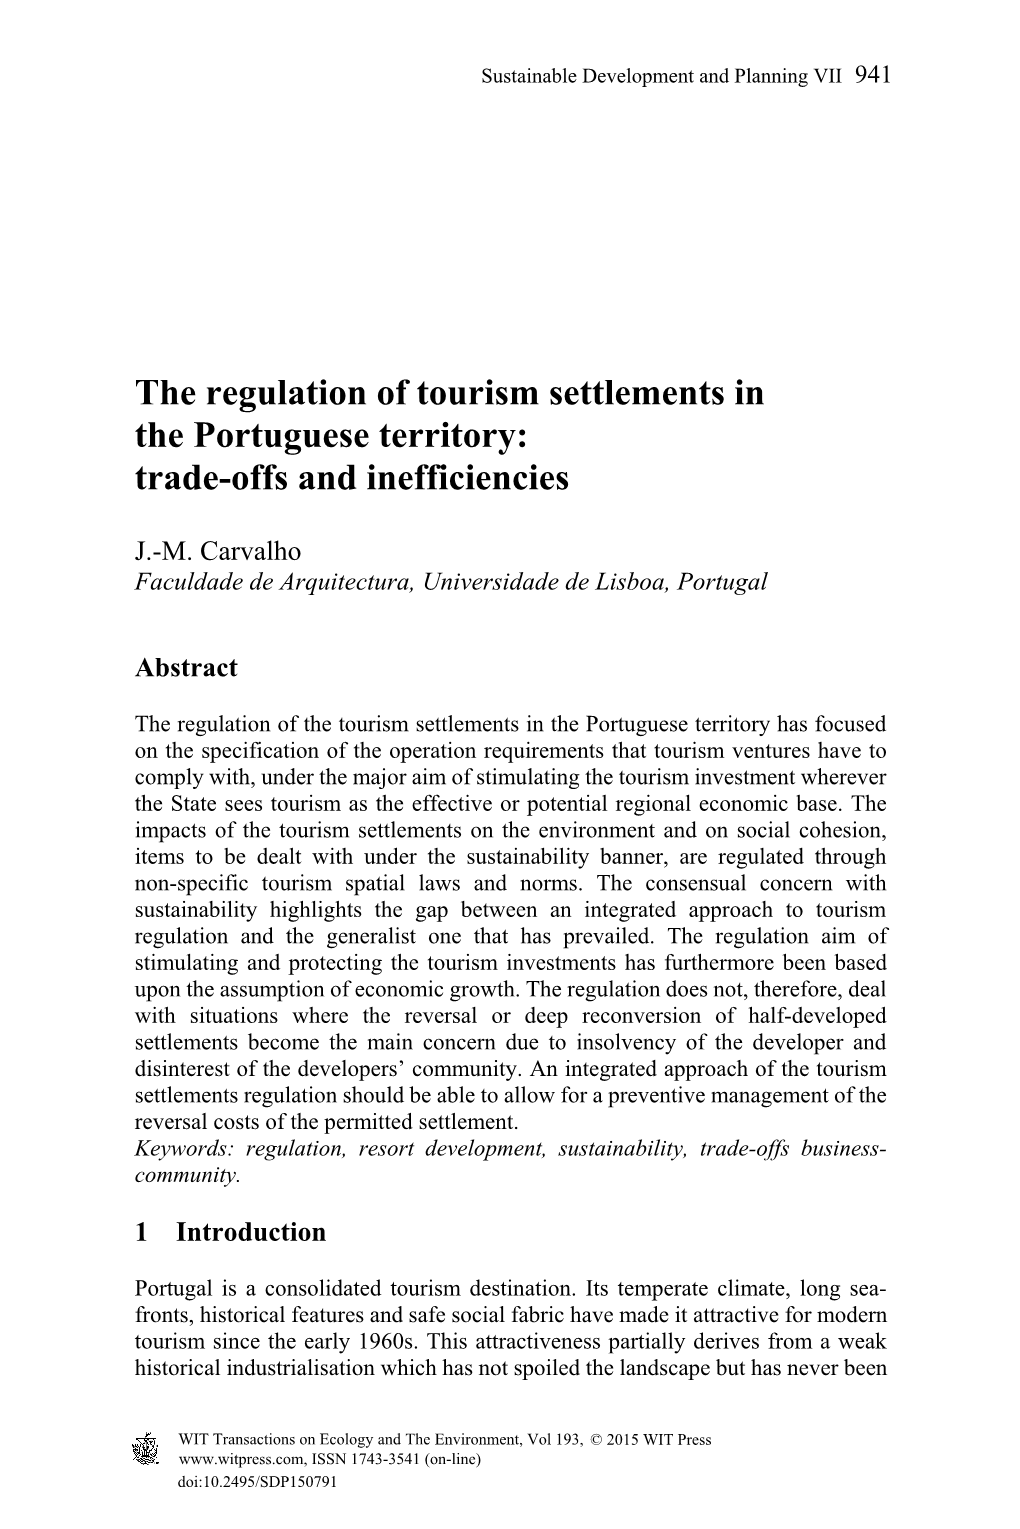 The Regulation of Tourism Settlements in the Portuguese Territory: Trade-Offs and Inefficiencies